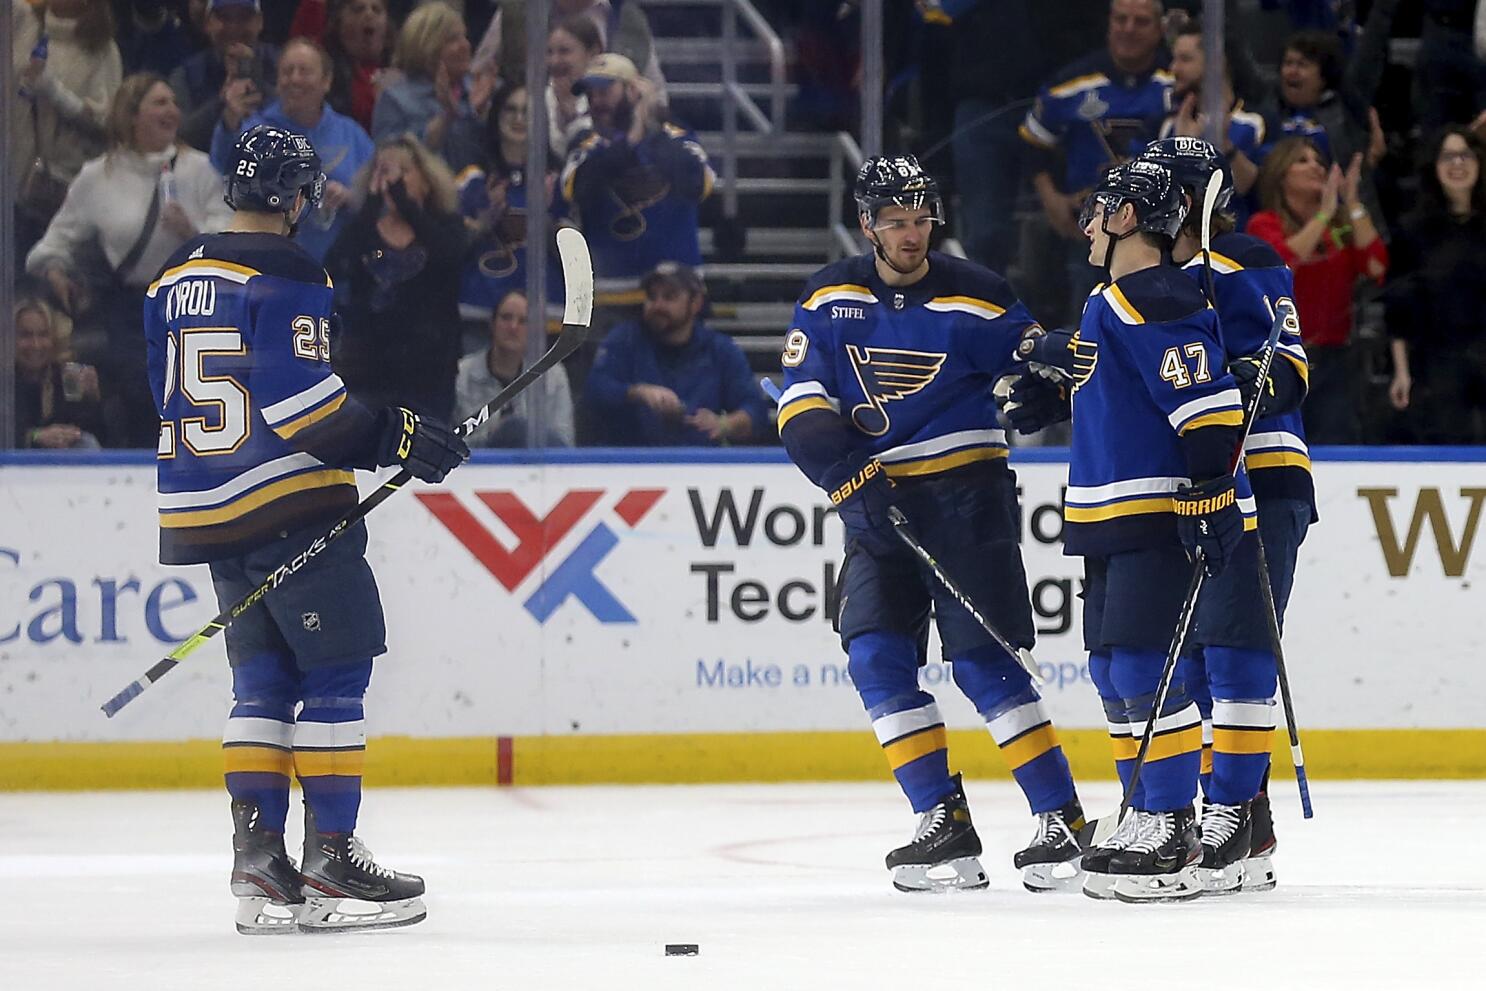 St. Louis Blues' Top 20 Goal Scorers All-Time